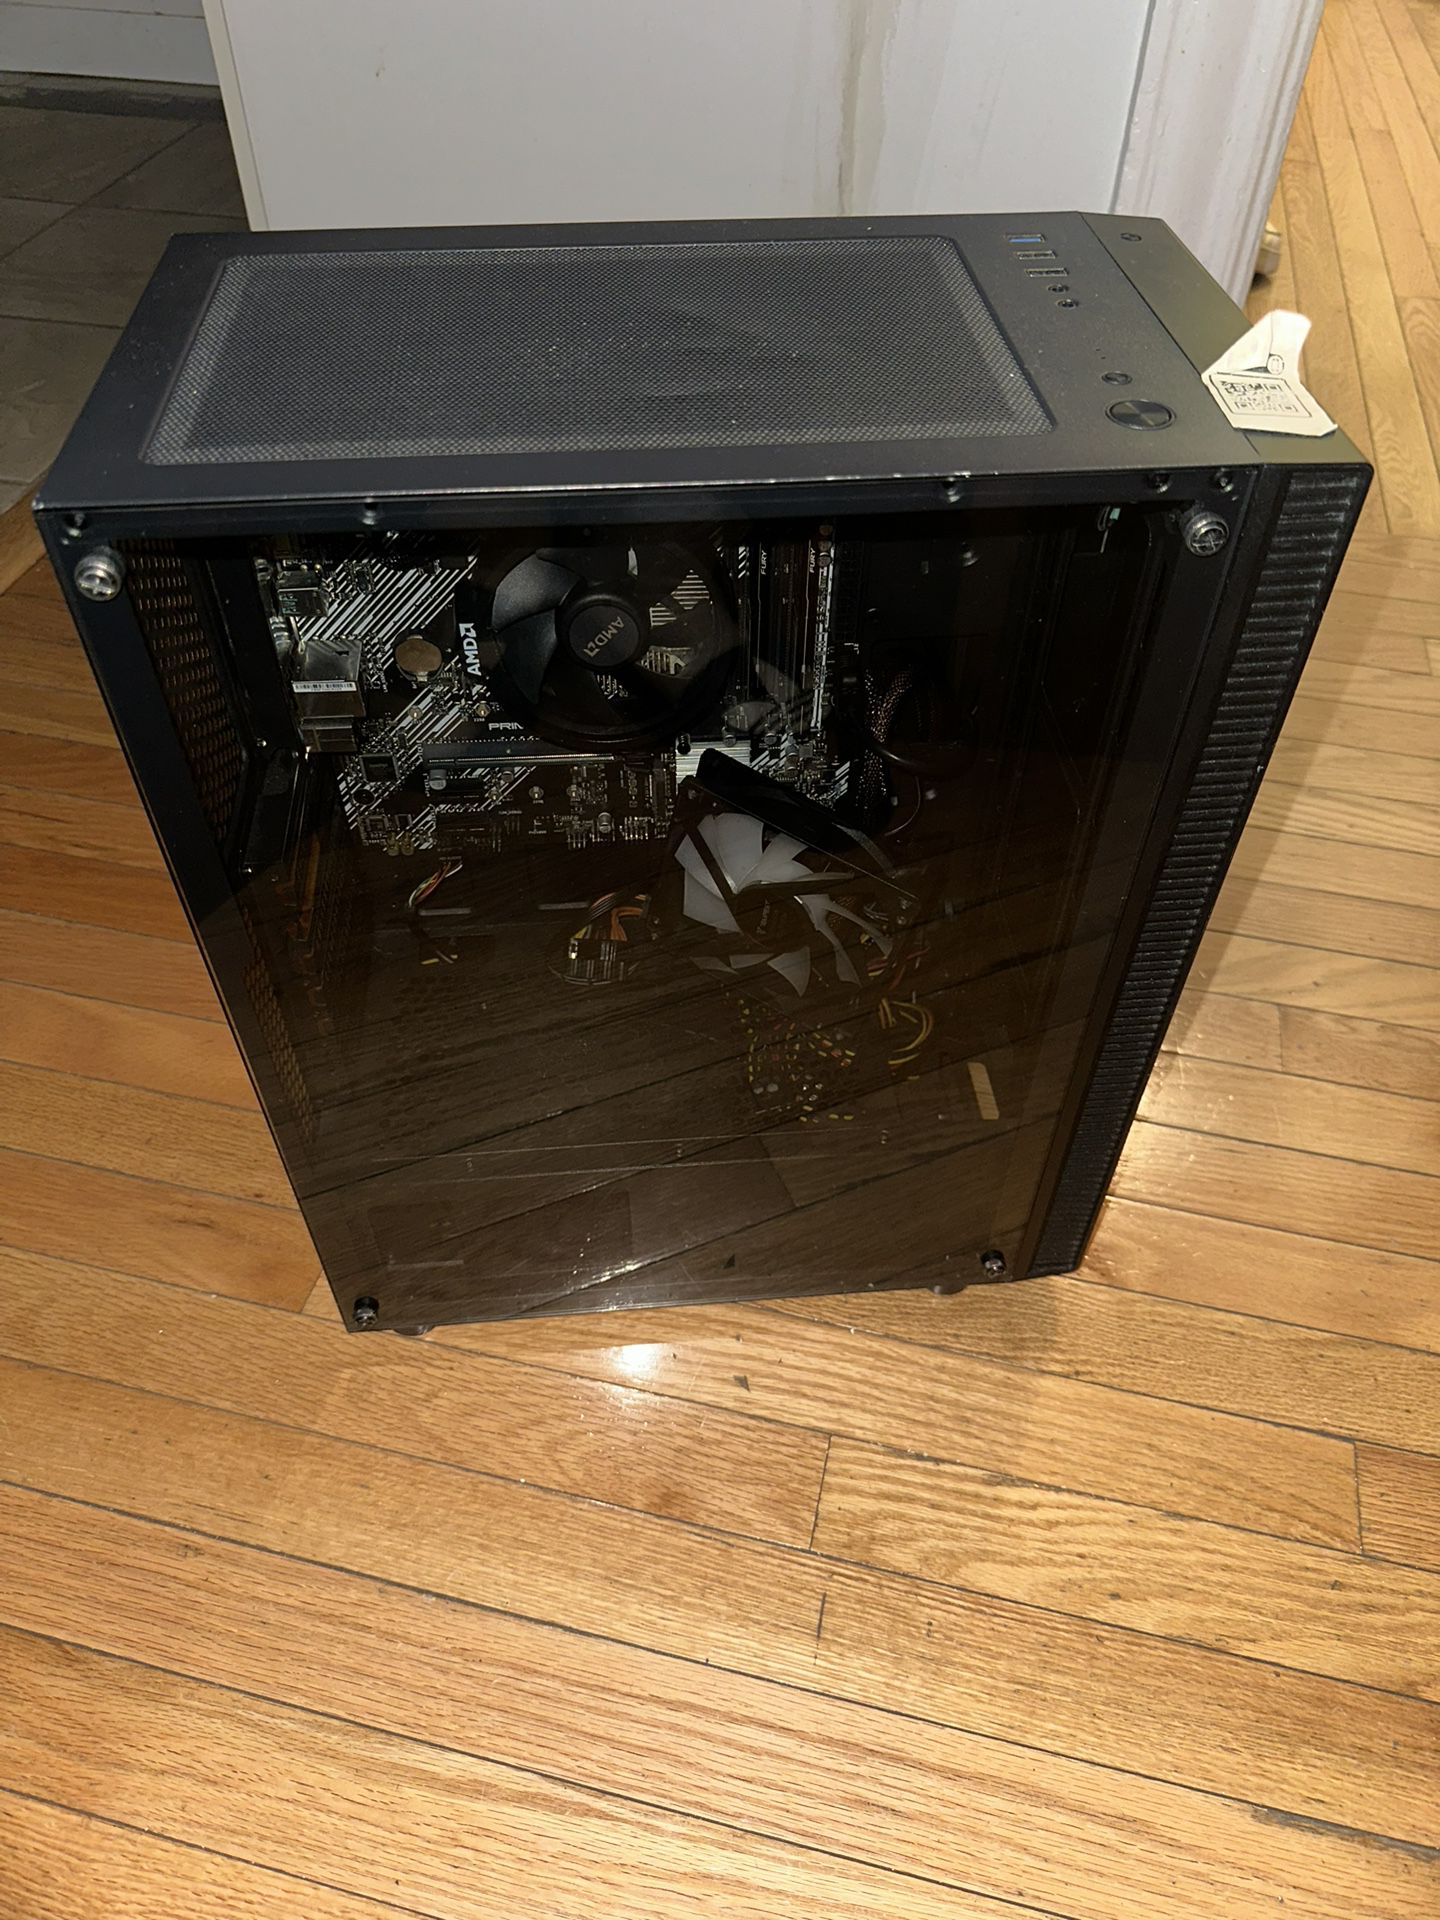 Pc Tower ( WITHOUT COMPONENTS)